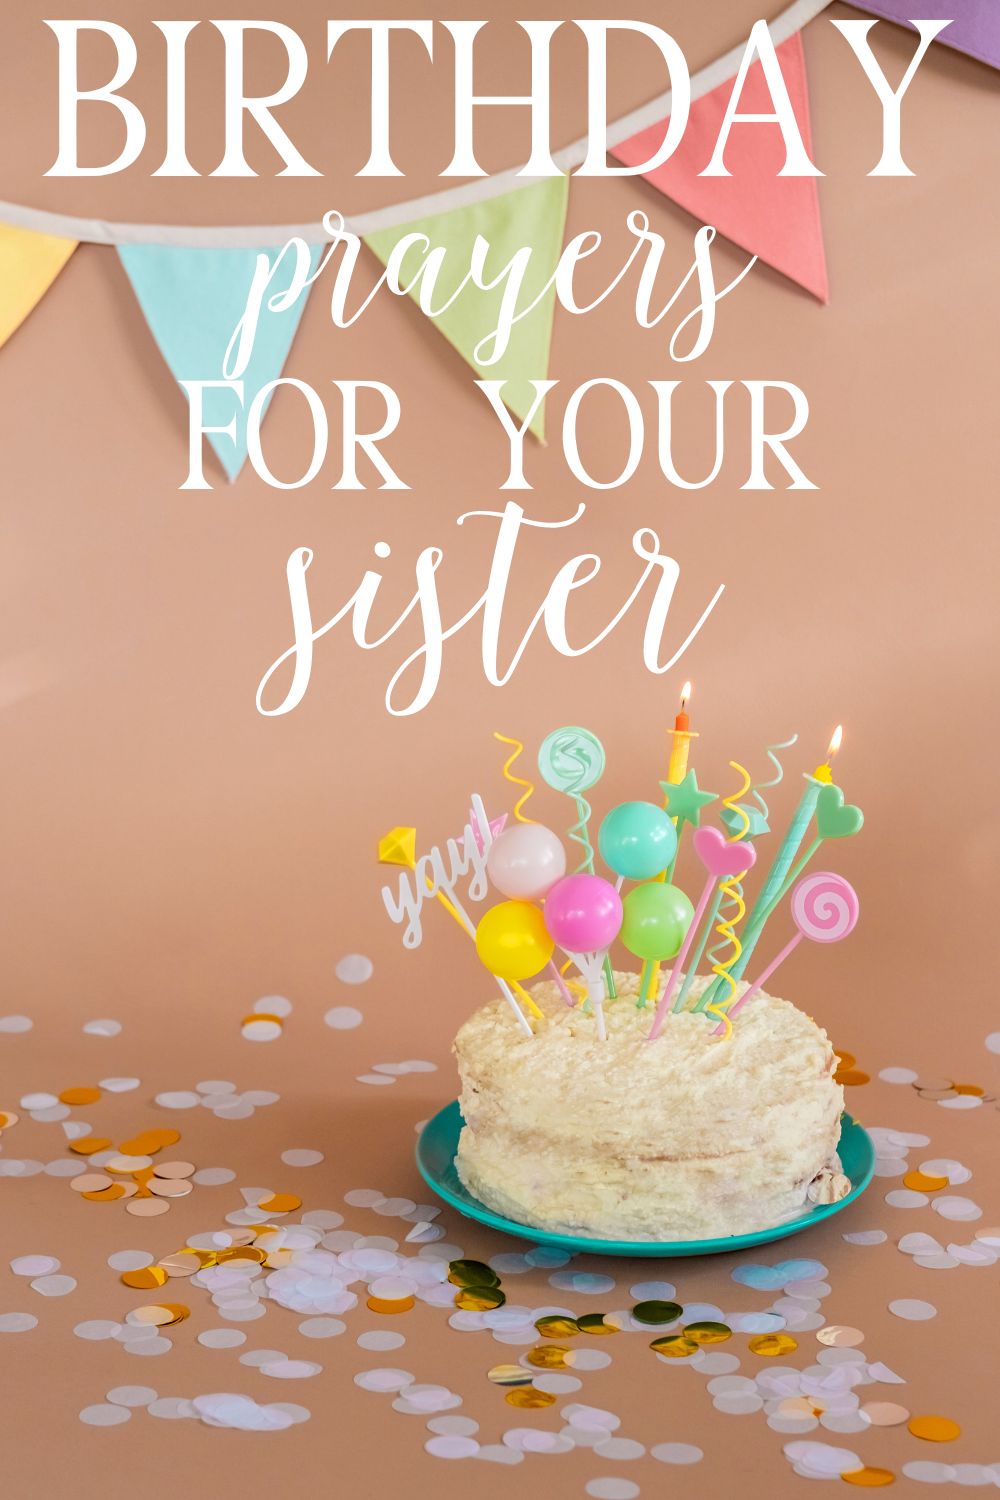 pinterest pin about birthday prayers for your sister with a fun cake on it to share